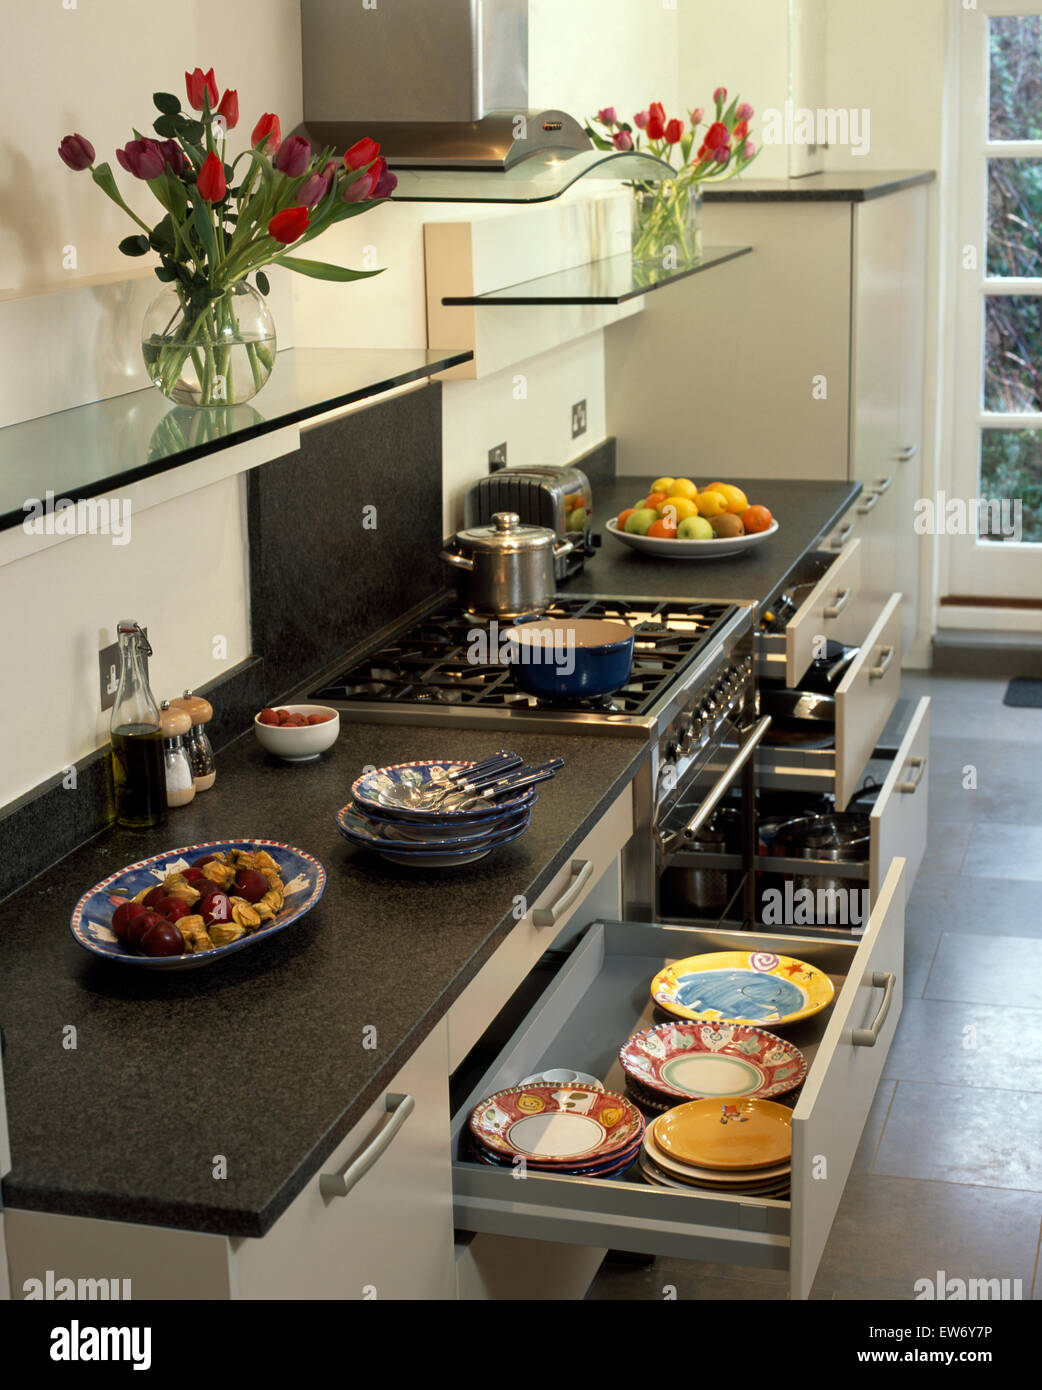 https://c8.alamy.com/comp/EW6Y7P/glass-shelves-above-fitted-units-with-slate-worktops-and-drawers-open-EW6Y7P.jpg